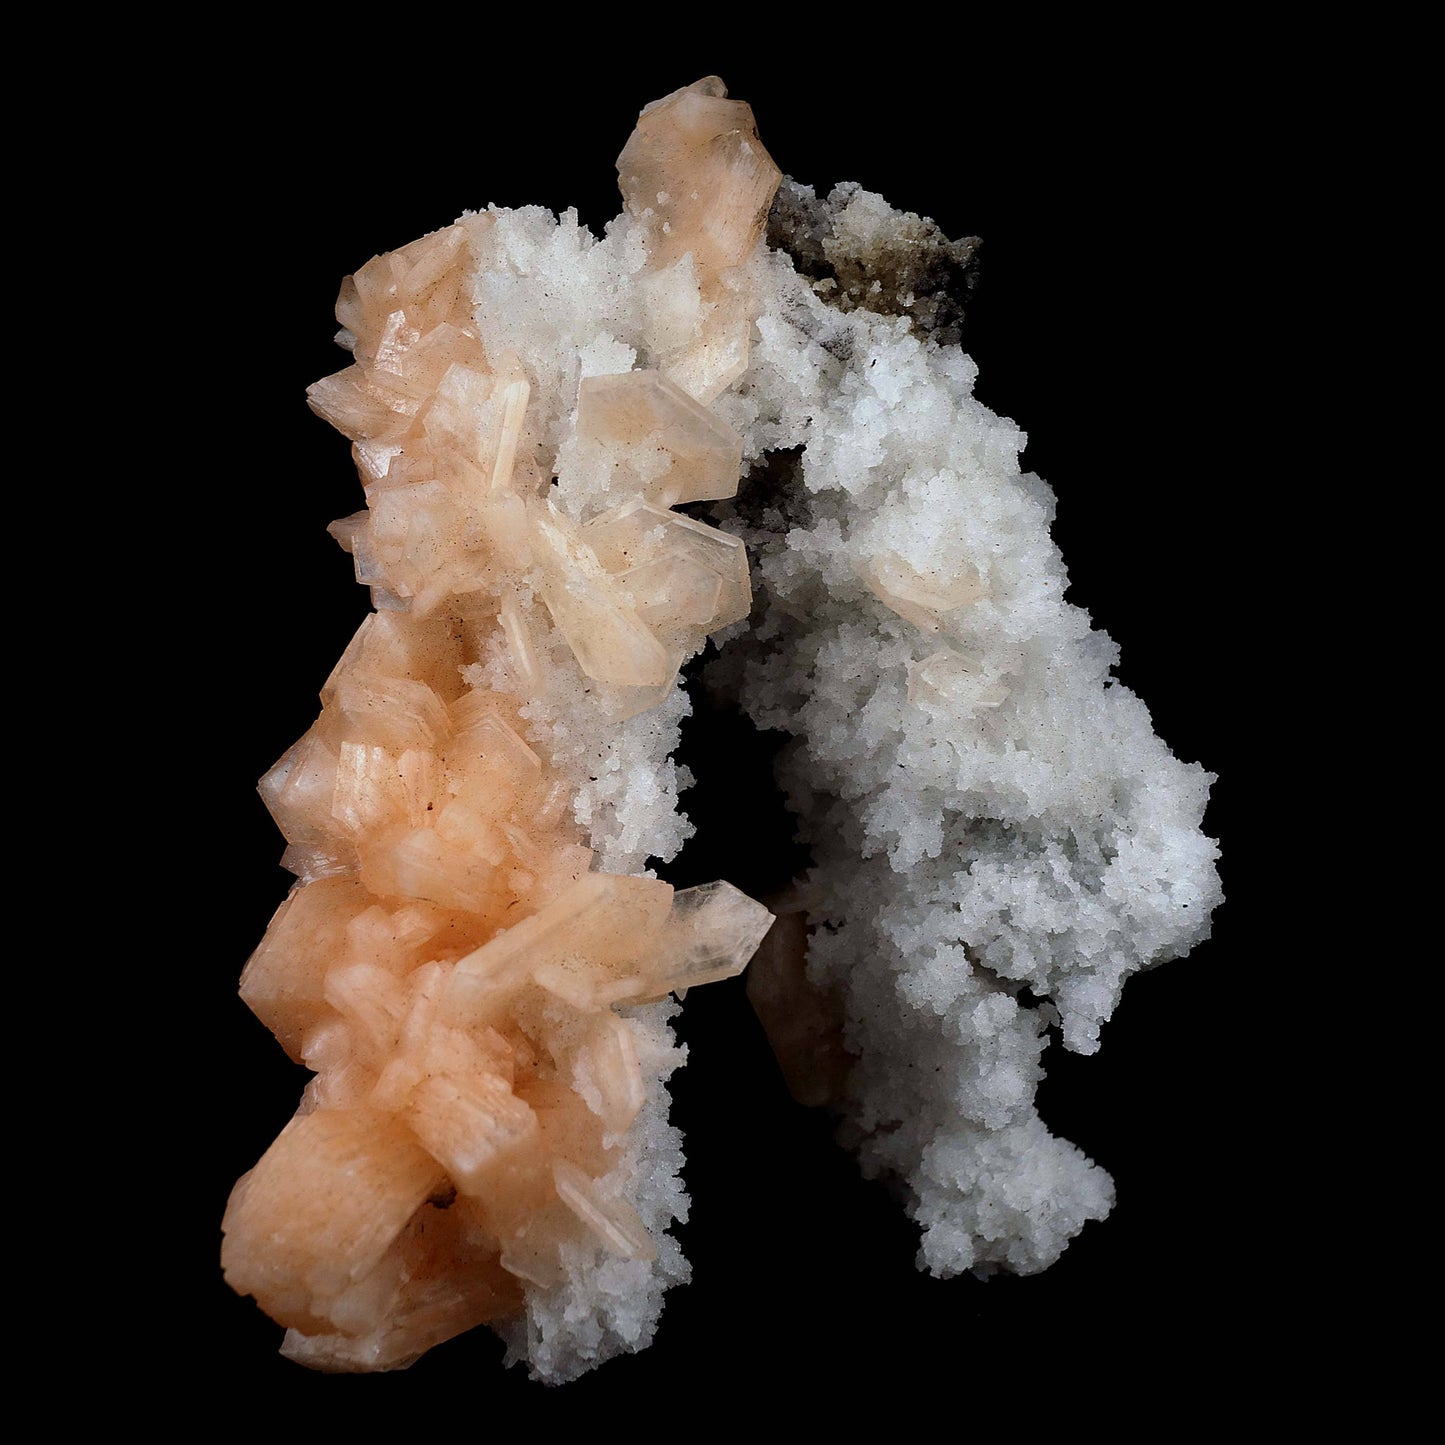 Stilbite with Chalcedony 'V' Formation Natural Mineral Specimen # B 39…  https://www.superbminerals.us/products/stilbite-with-chalcedony-v-formation-natural-mineral-specimen-b-3973  Features This intricate Chalcedony stalactite hosts red-peach Stilbite and beautifully smaller gemmy Stilbite crystal on a another part of Chalcedony contrasting matrix.&nbsp; Endless fractal adventures await! Primary Mineral(s):&nbsp; Stilbite Secondary Mineral(s): N/AMatrix: Chalcedony14 cm x 10 cm345 Gms